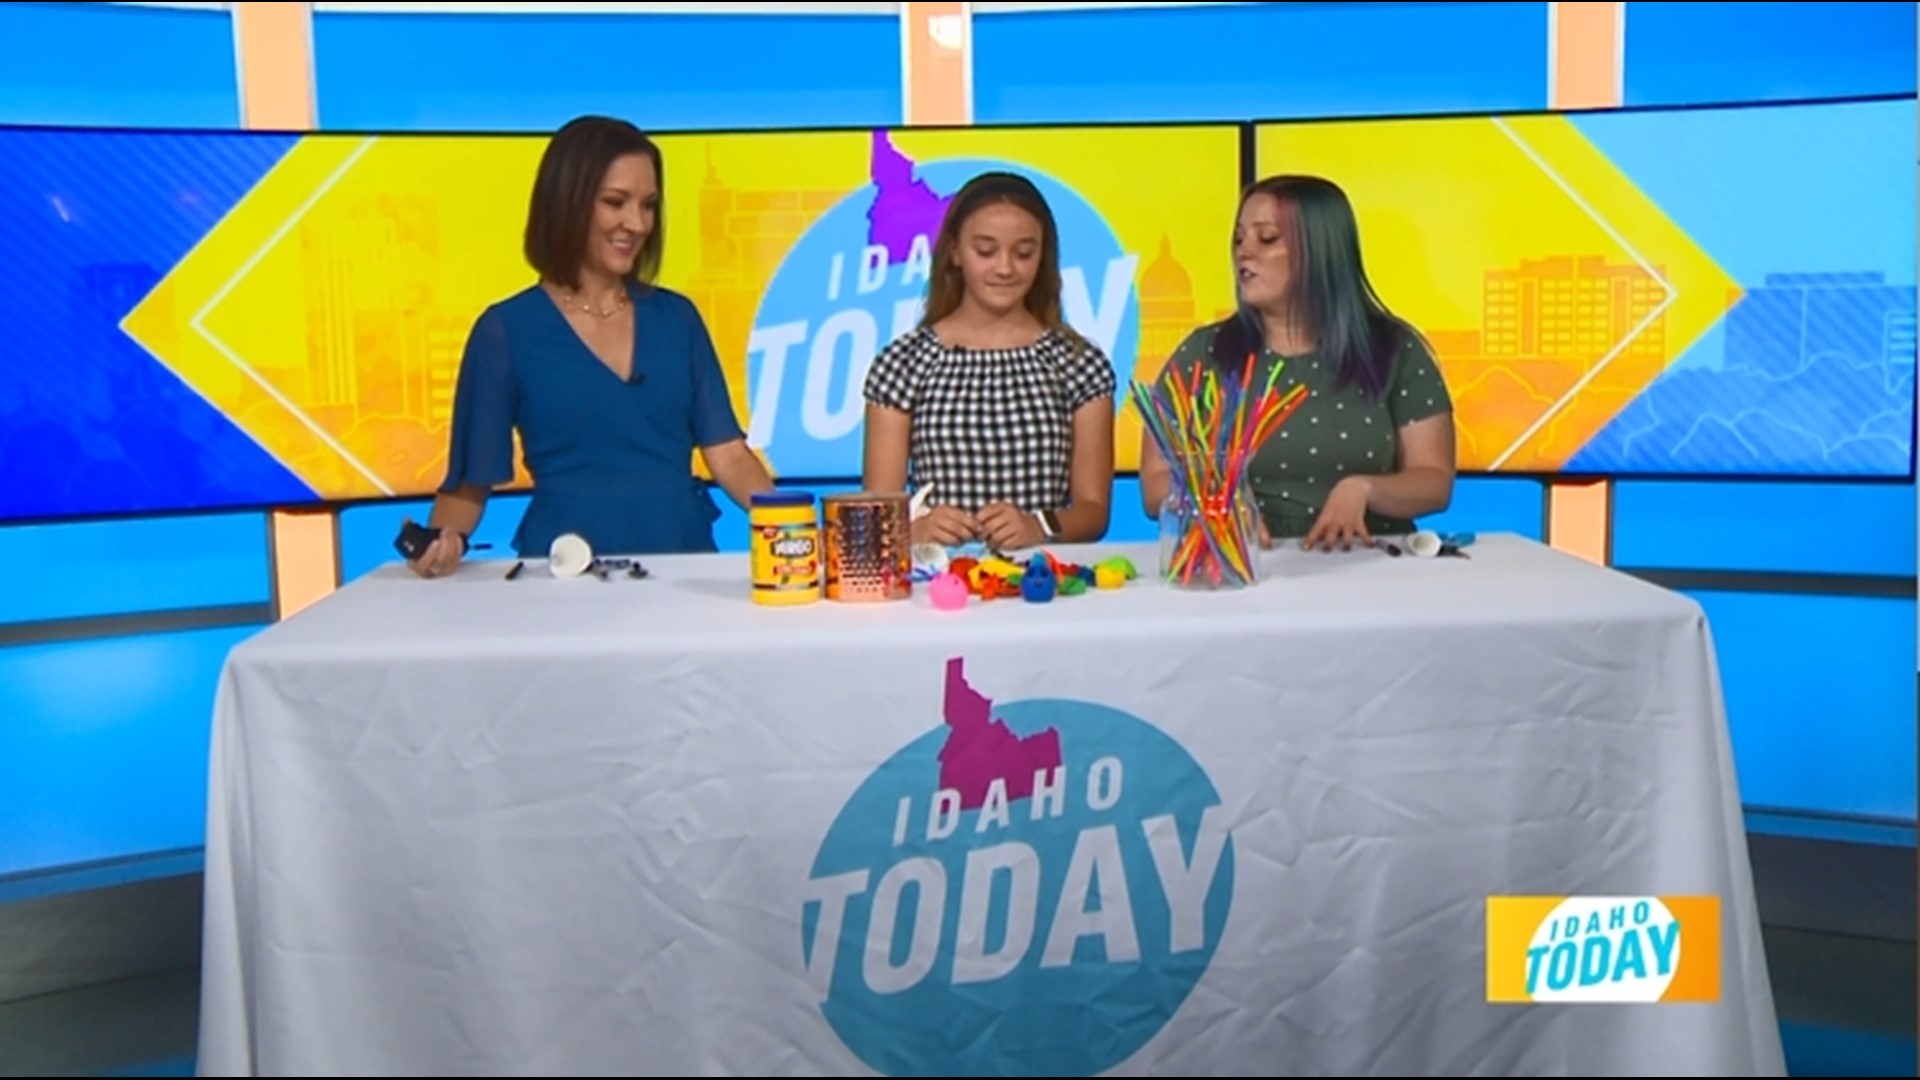 Our friend Ivy stops by the studio to show us how to make DIY stress balls, just in time for school to start.